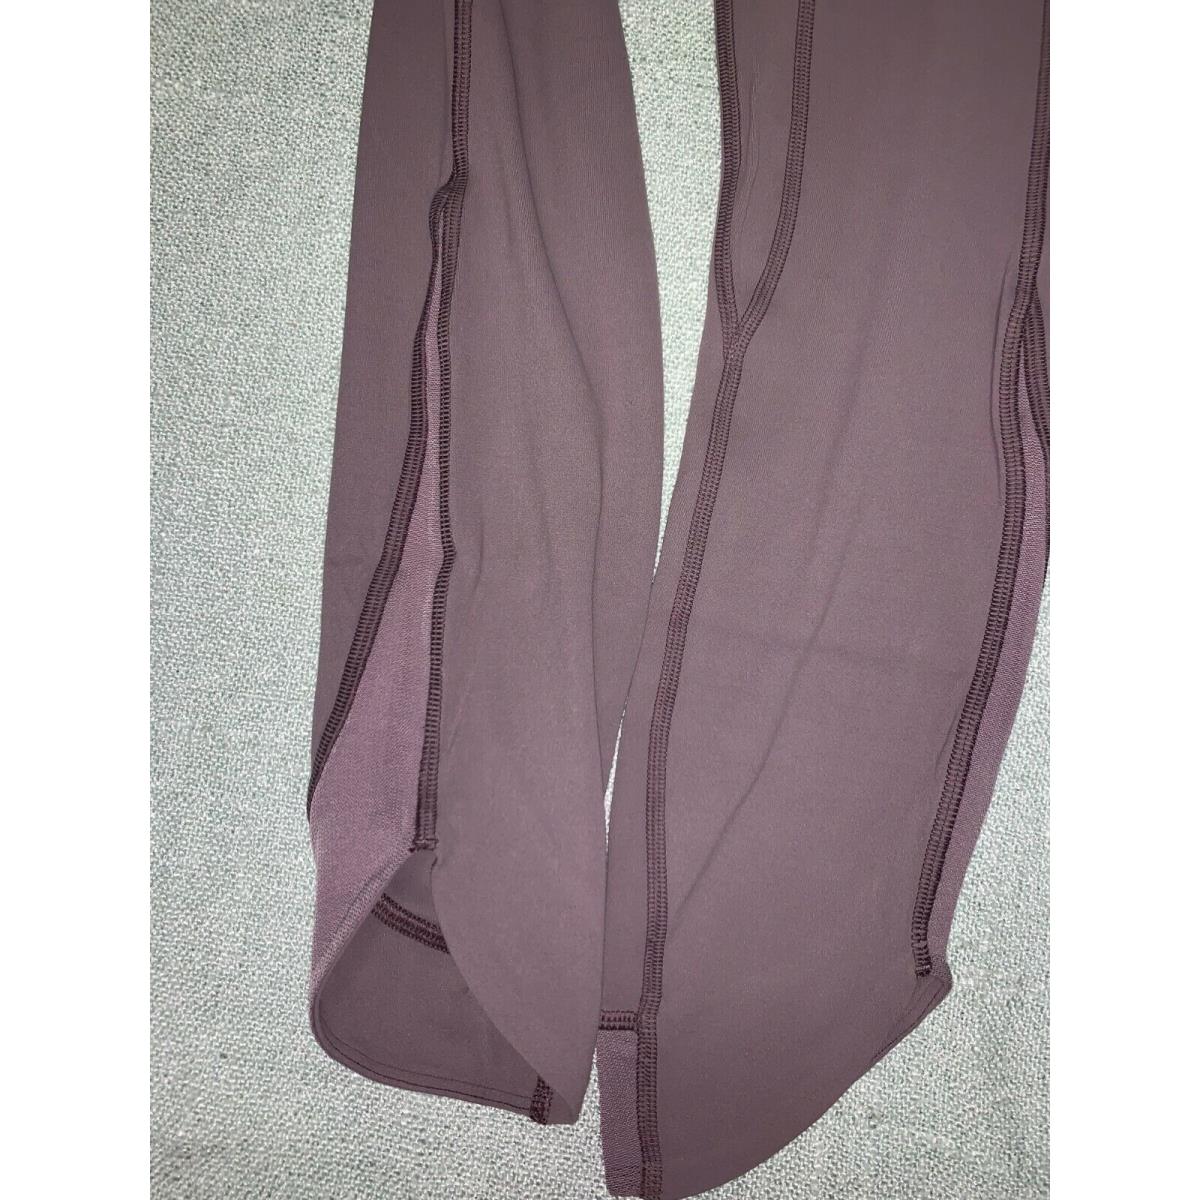 Lululemon clothing  - Frosted Mulberry 1